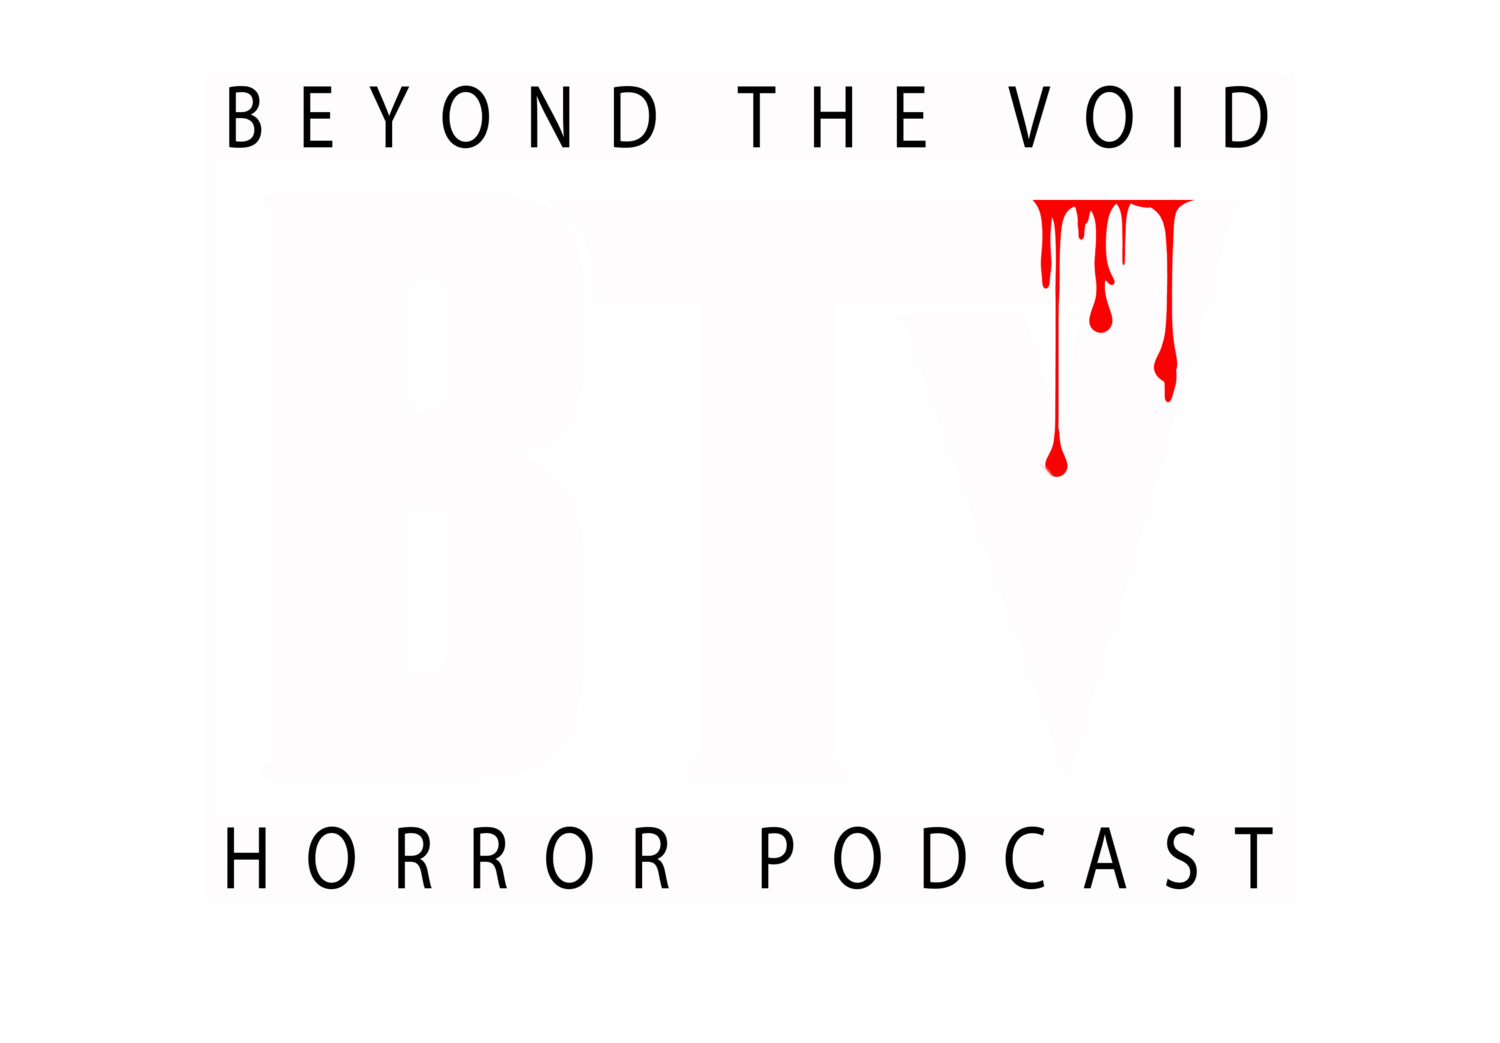 Beyond The Void Horror Podcast